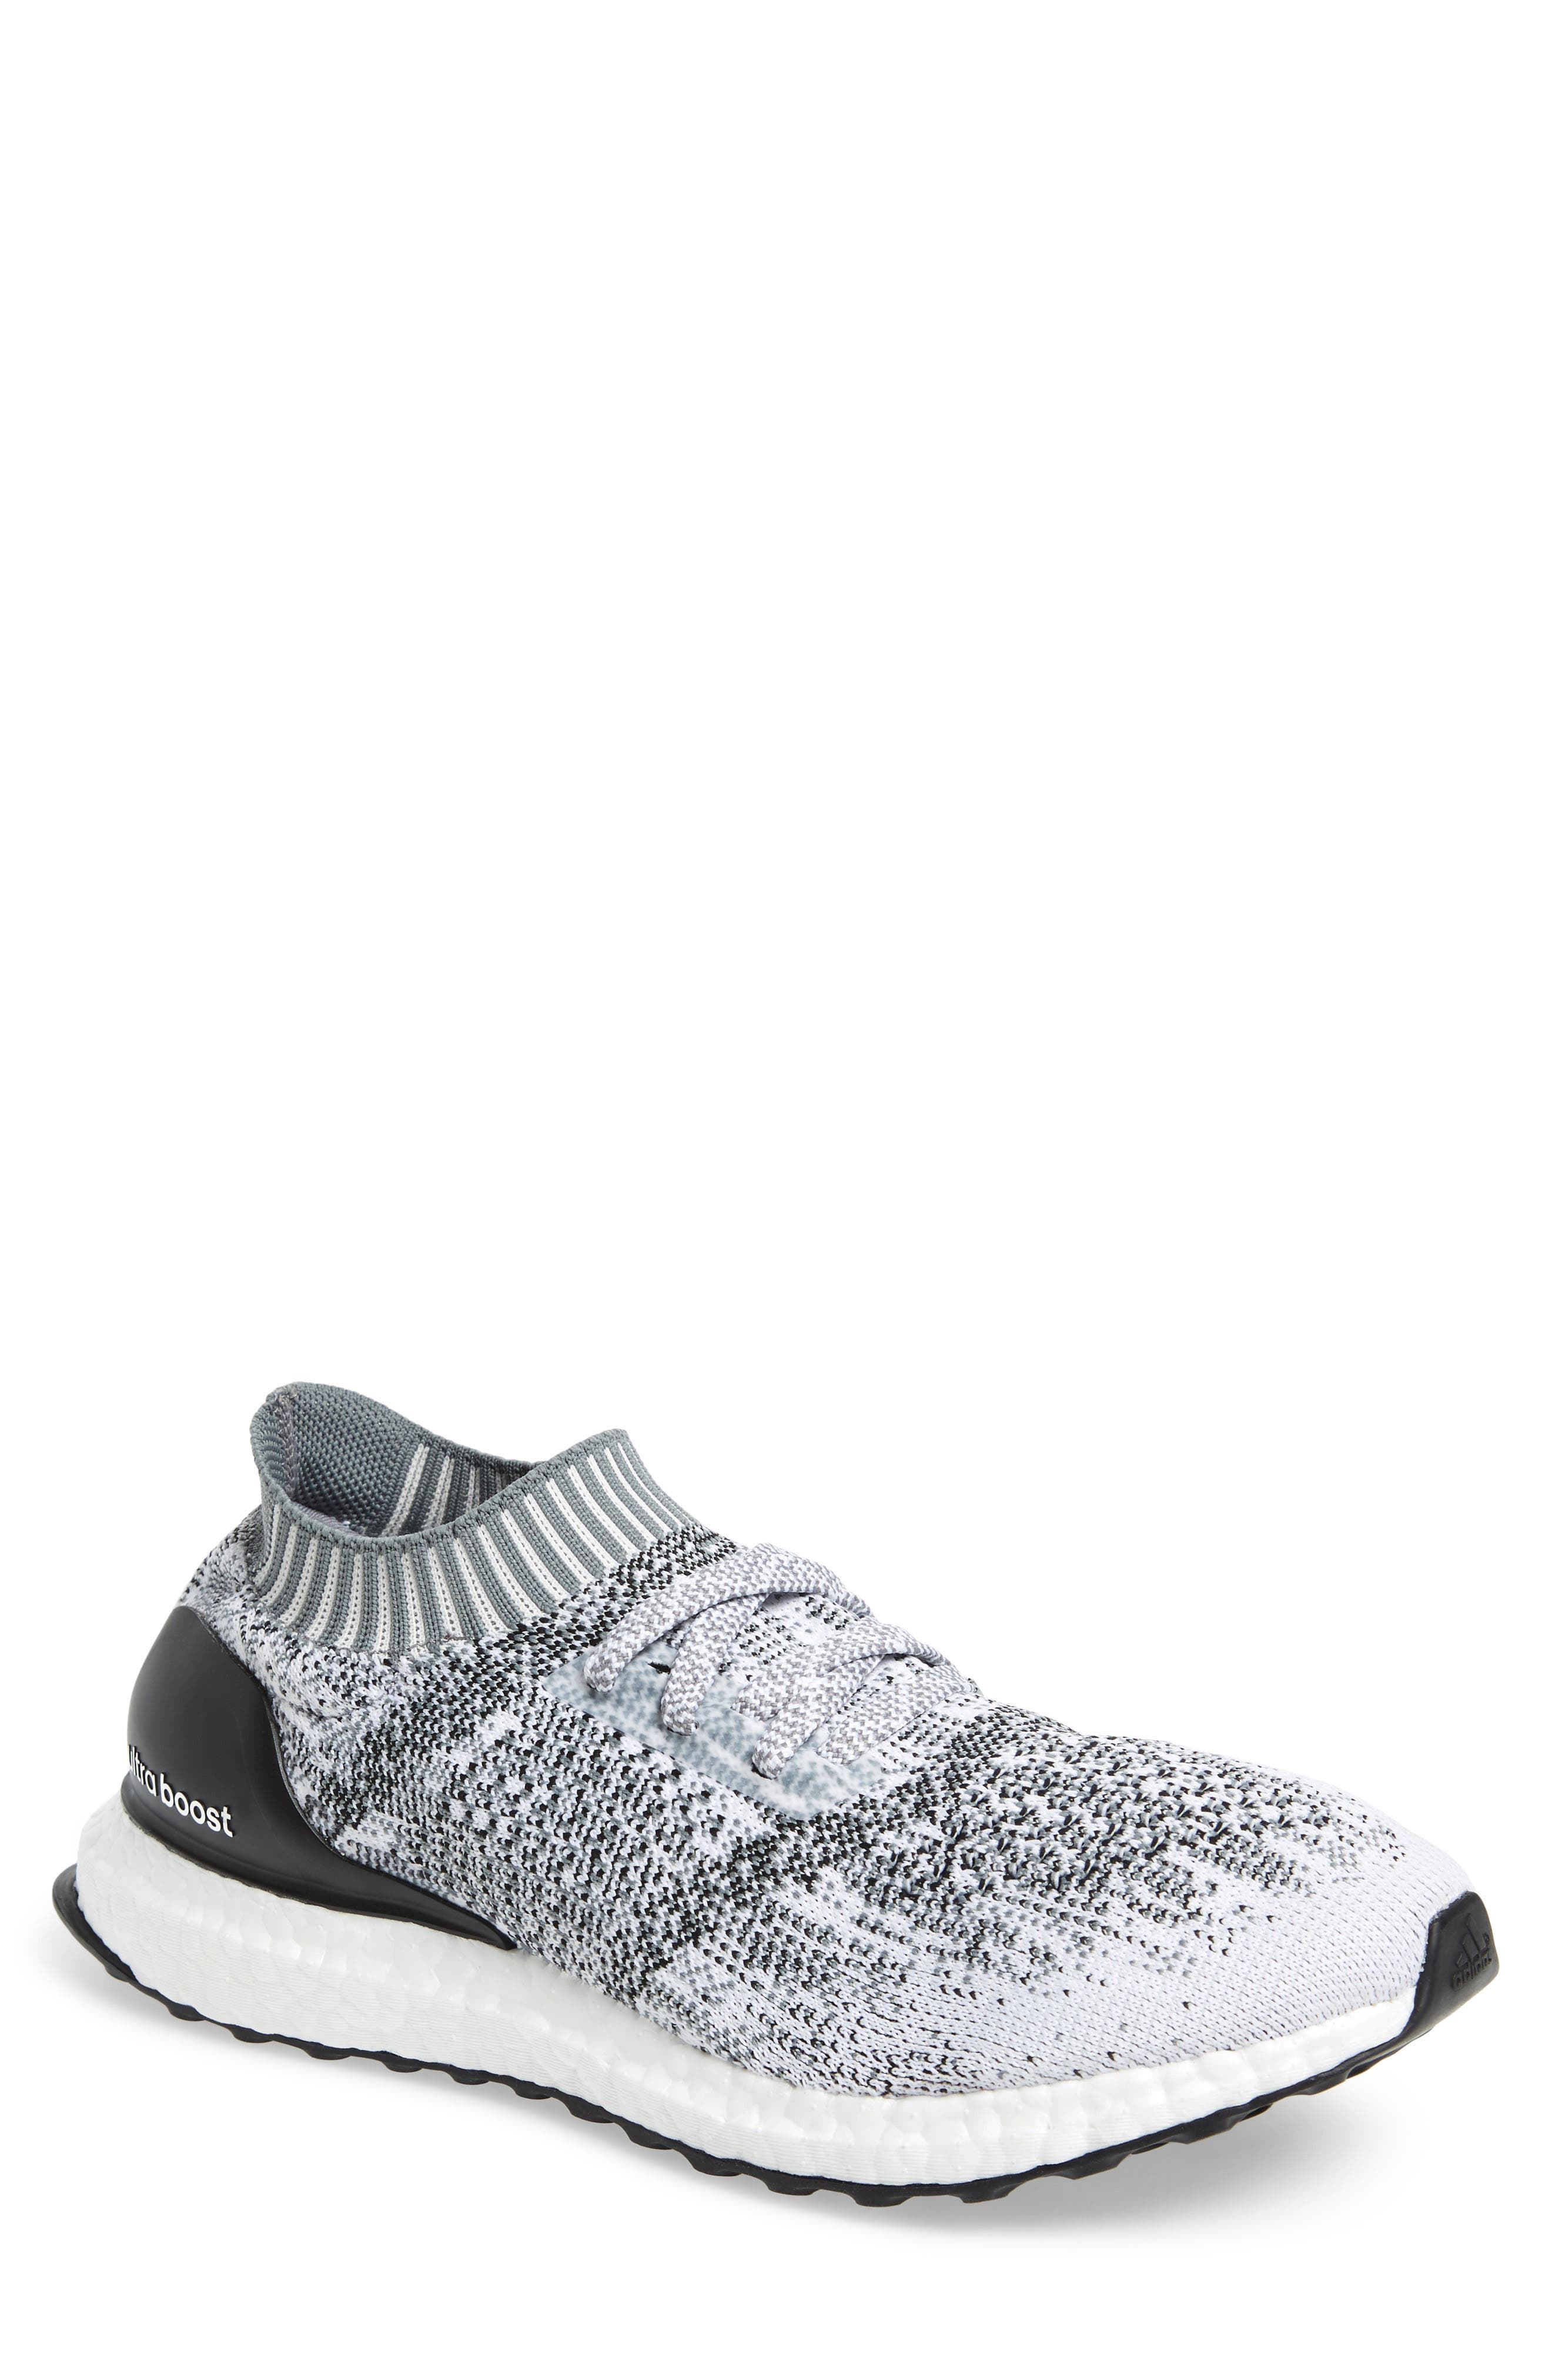 ultraboost uncaged shoes mens